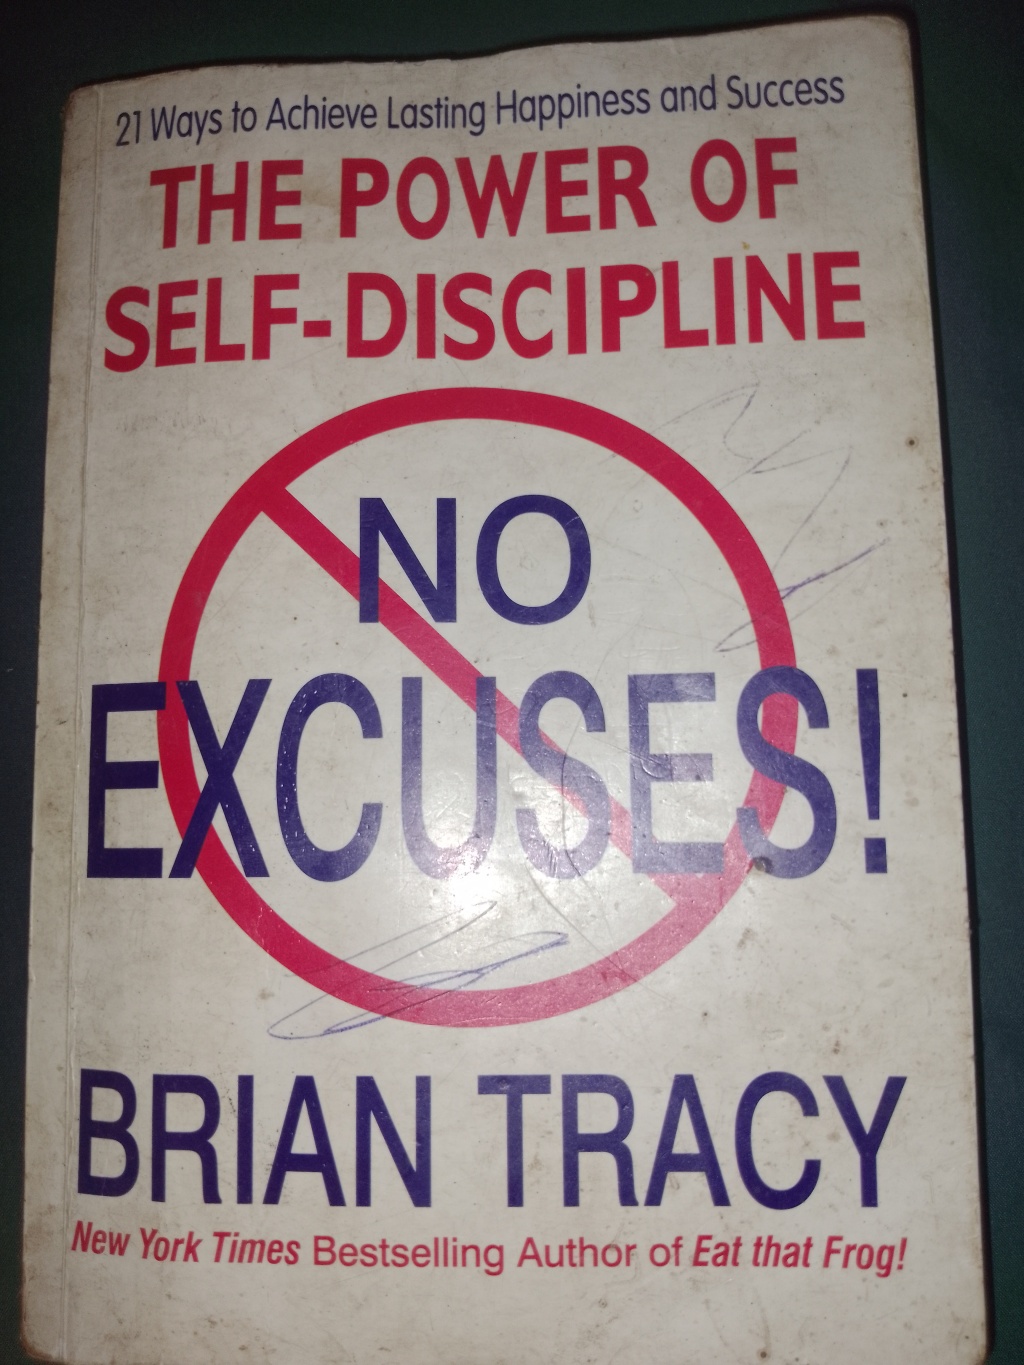 REVIEW of the first two pages of Brian Tracy’s Book: The power of Self-discipline